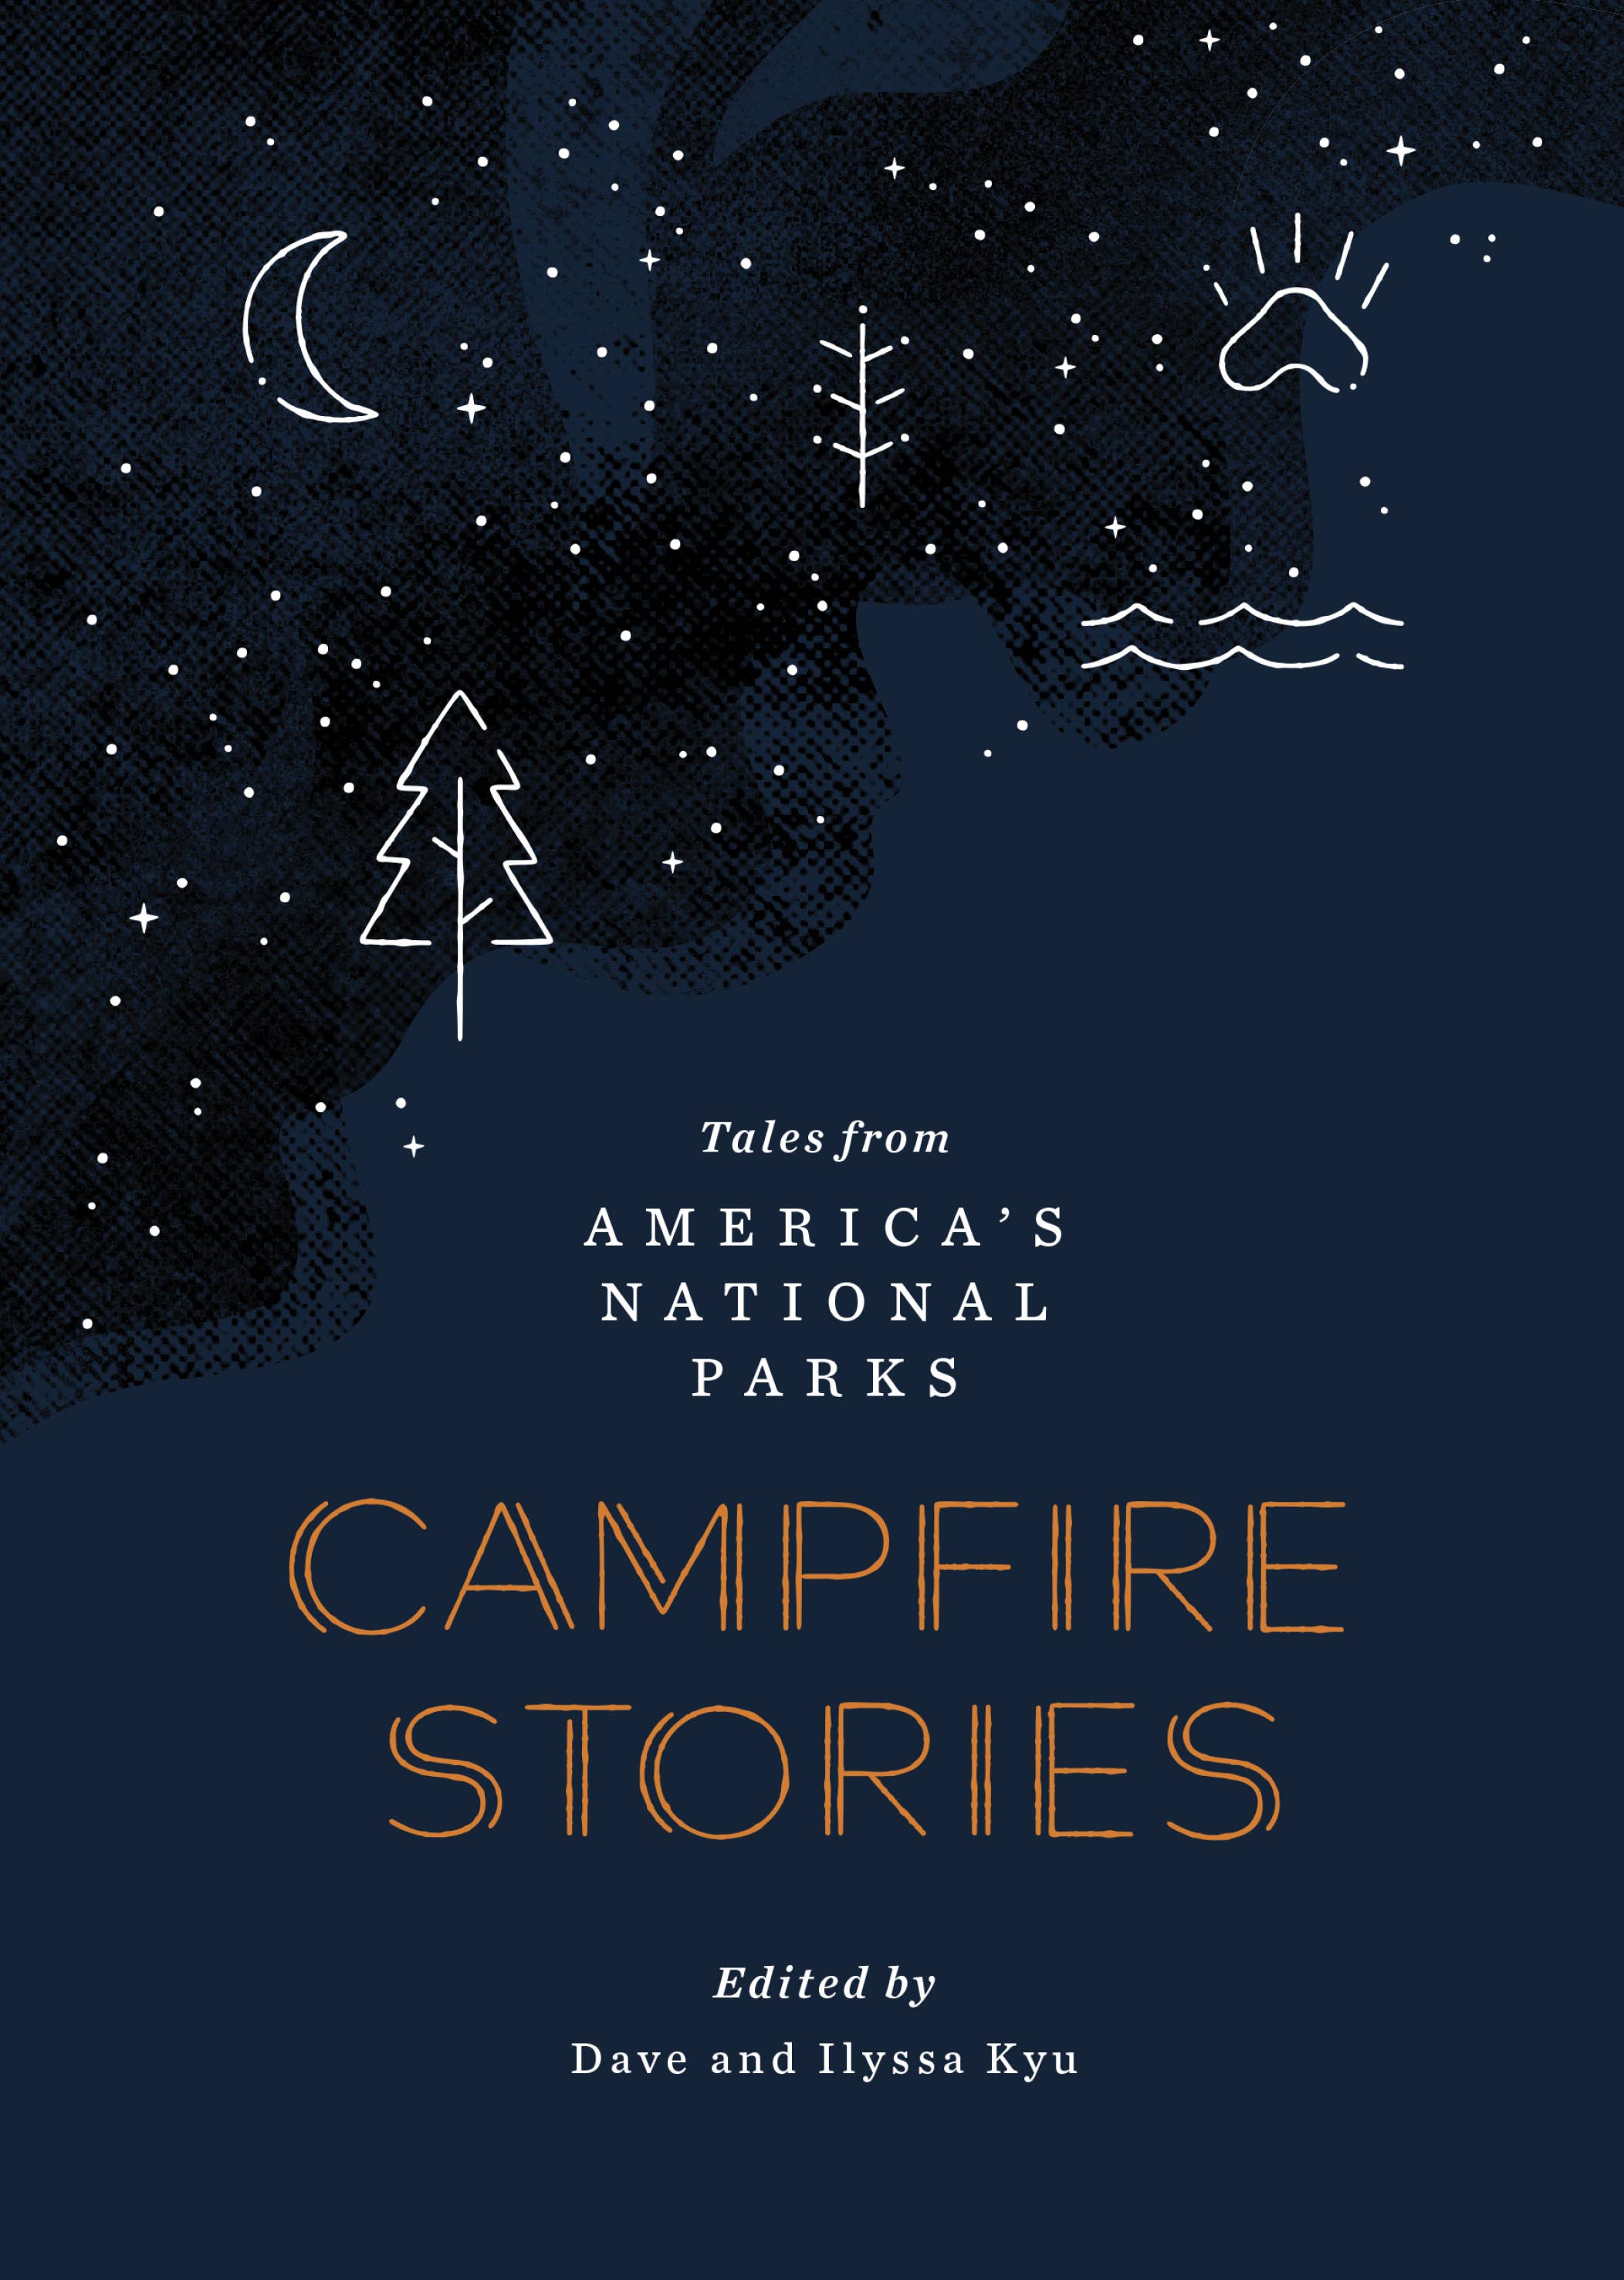 Mountaineers Books - Campfire Stories  -Tales from America's National Parks